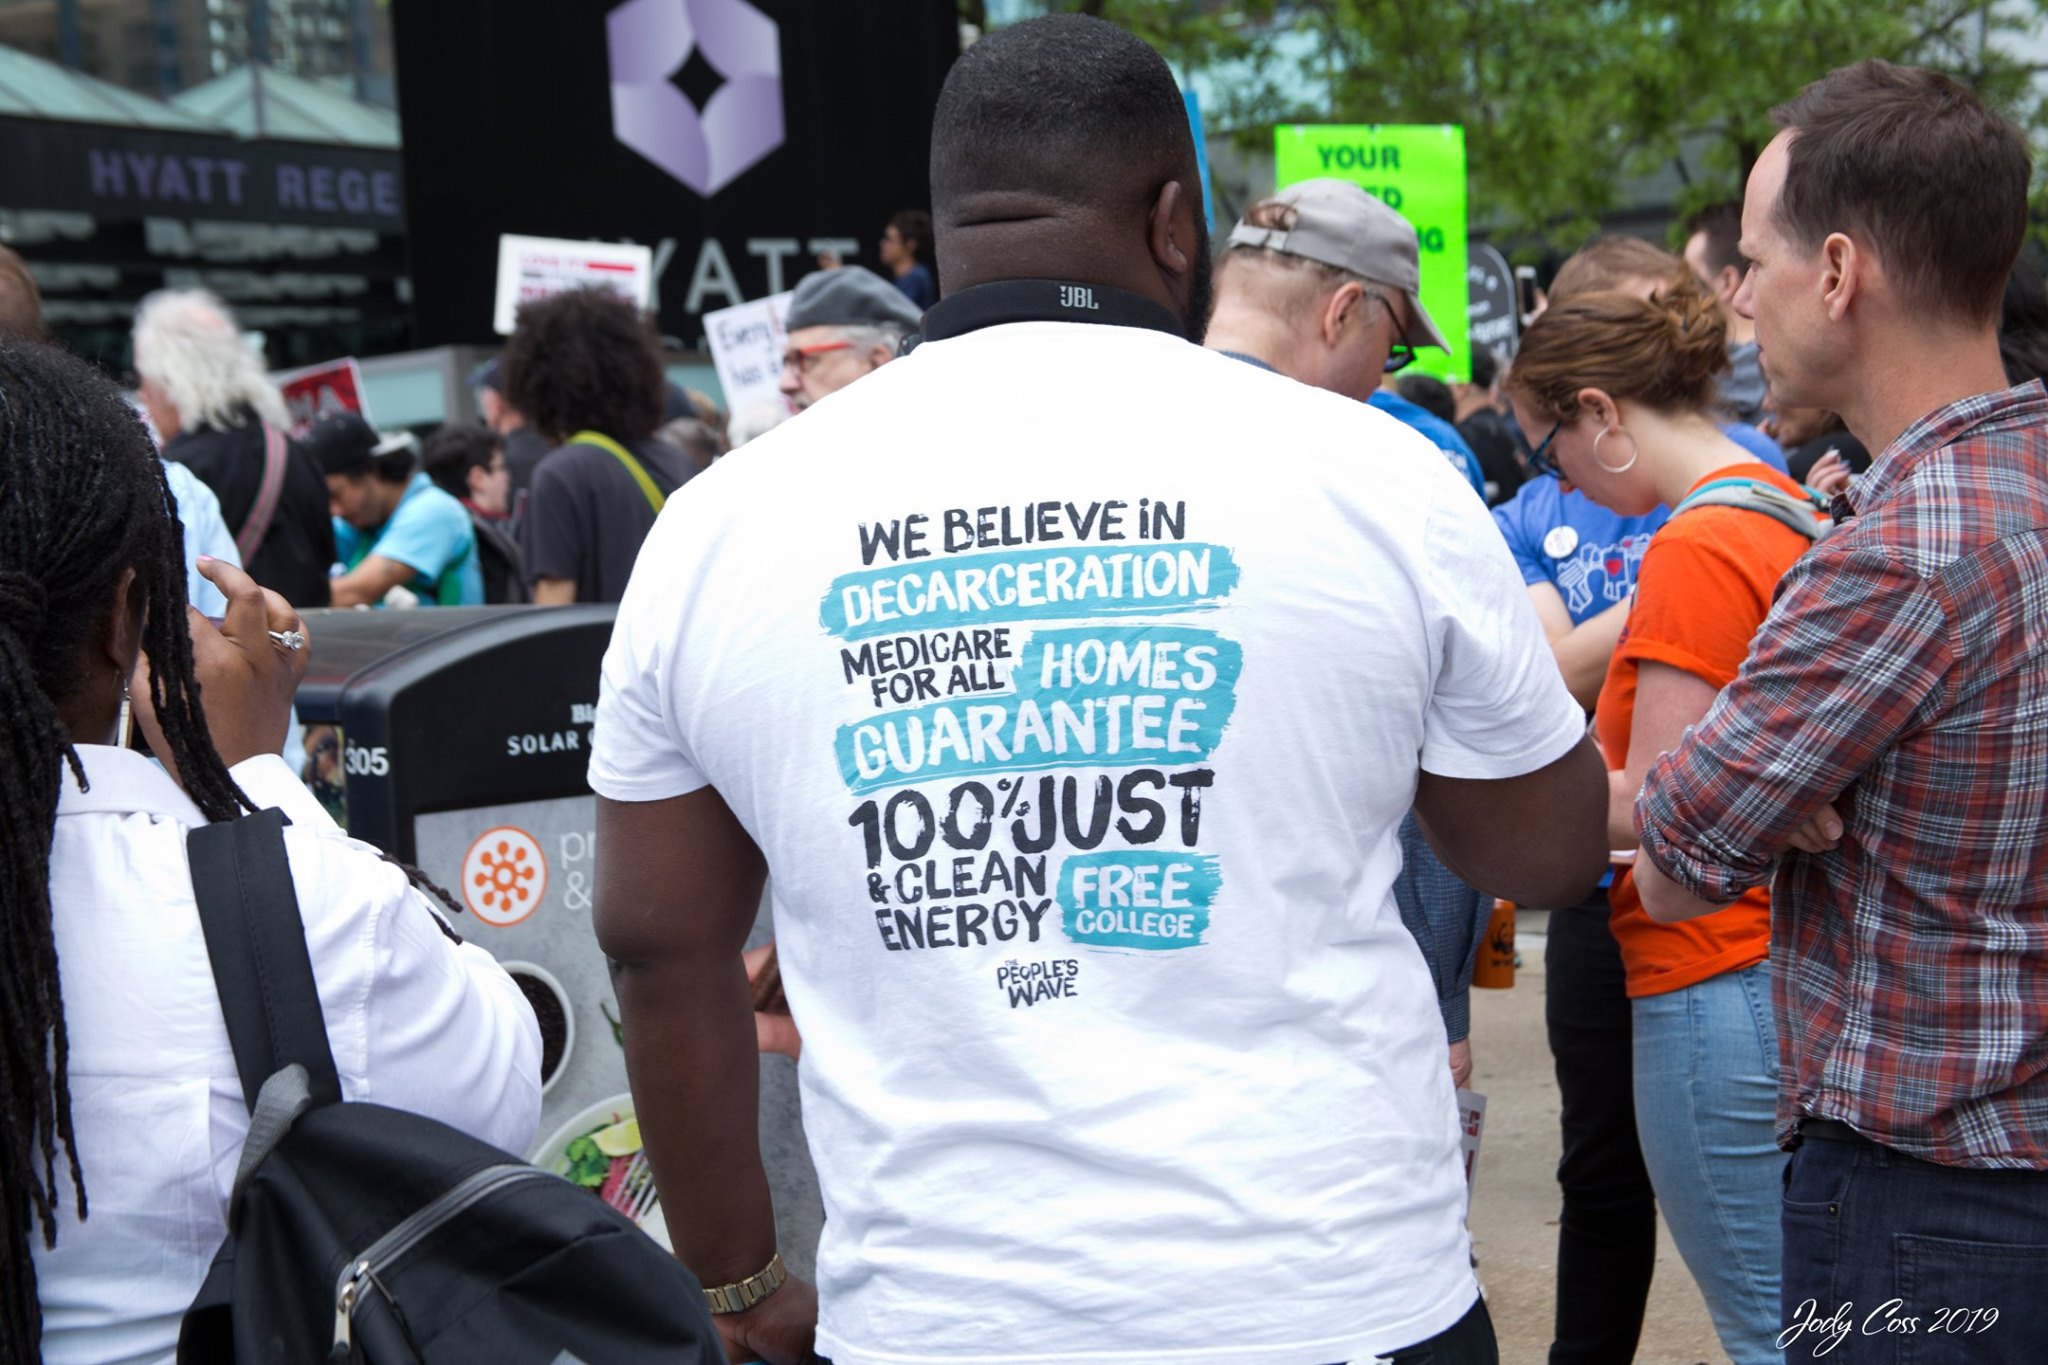 A People's Action T-shirt with campaign slogans informed by ideology.